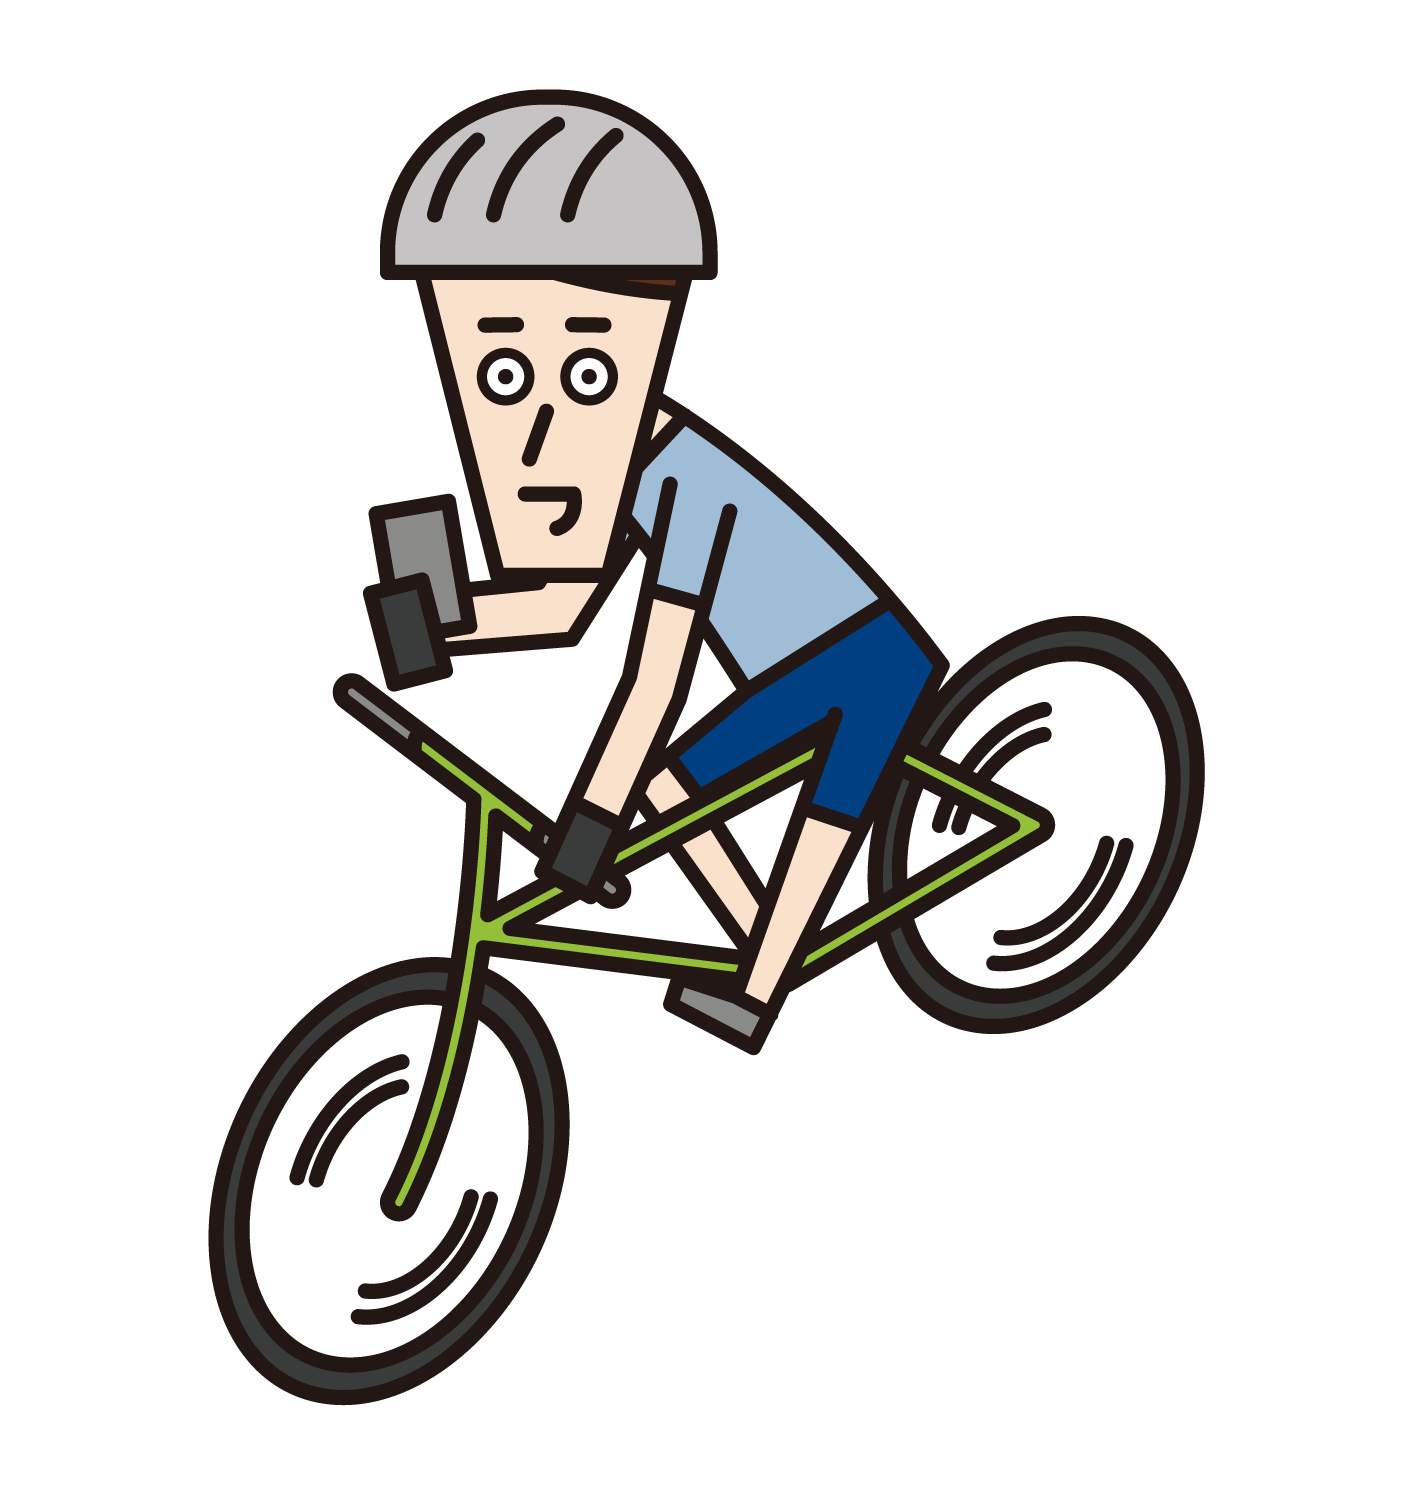 Illustration of a man driving a bicycle while operating a smartphone